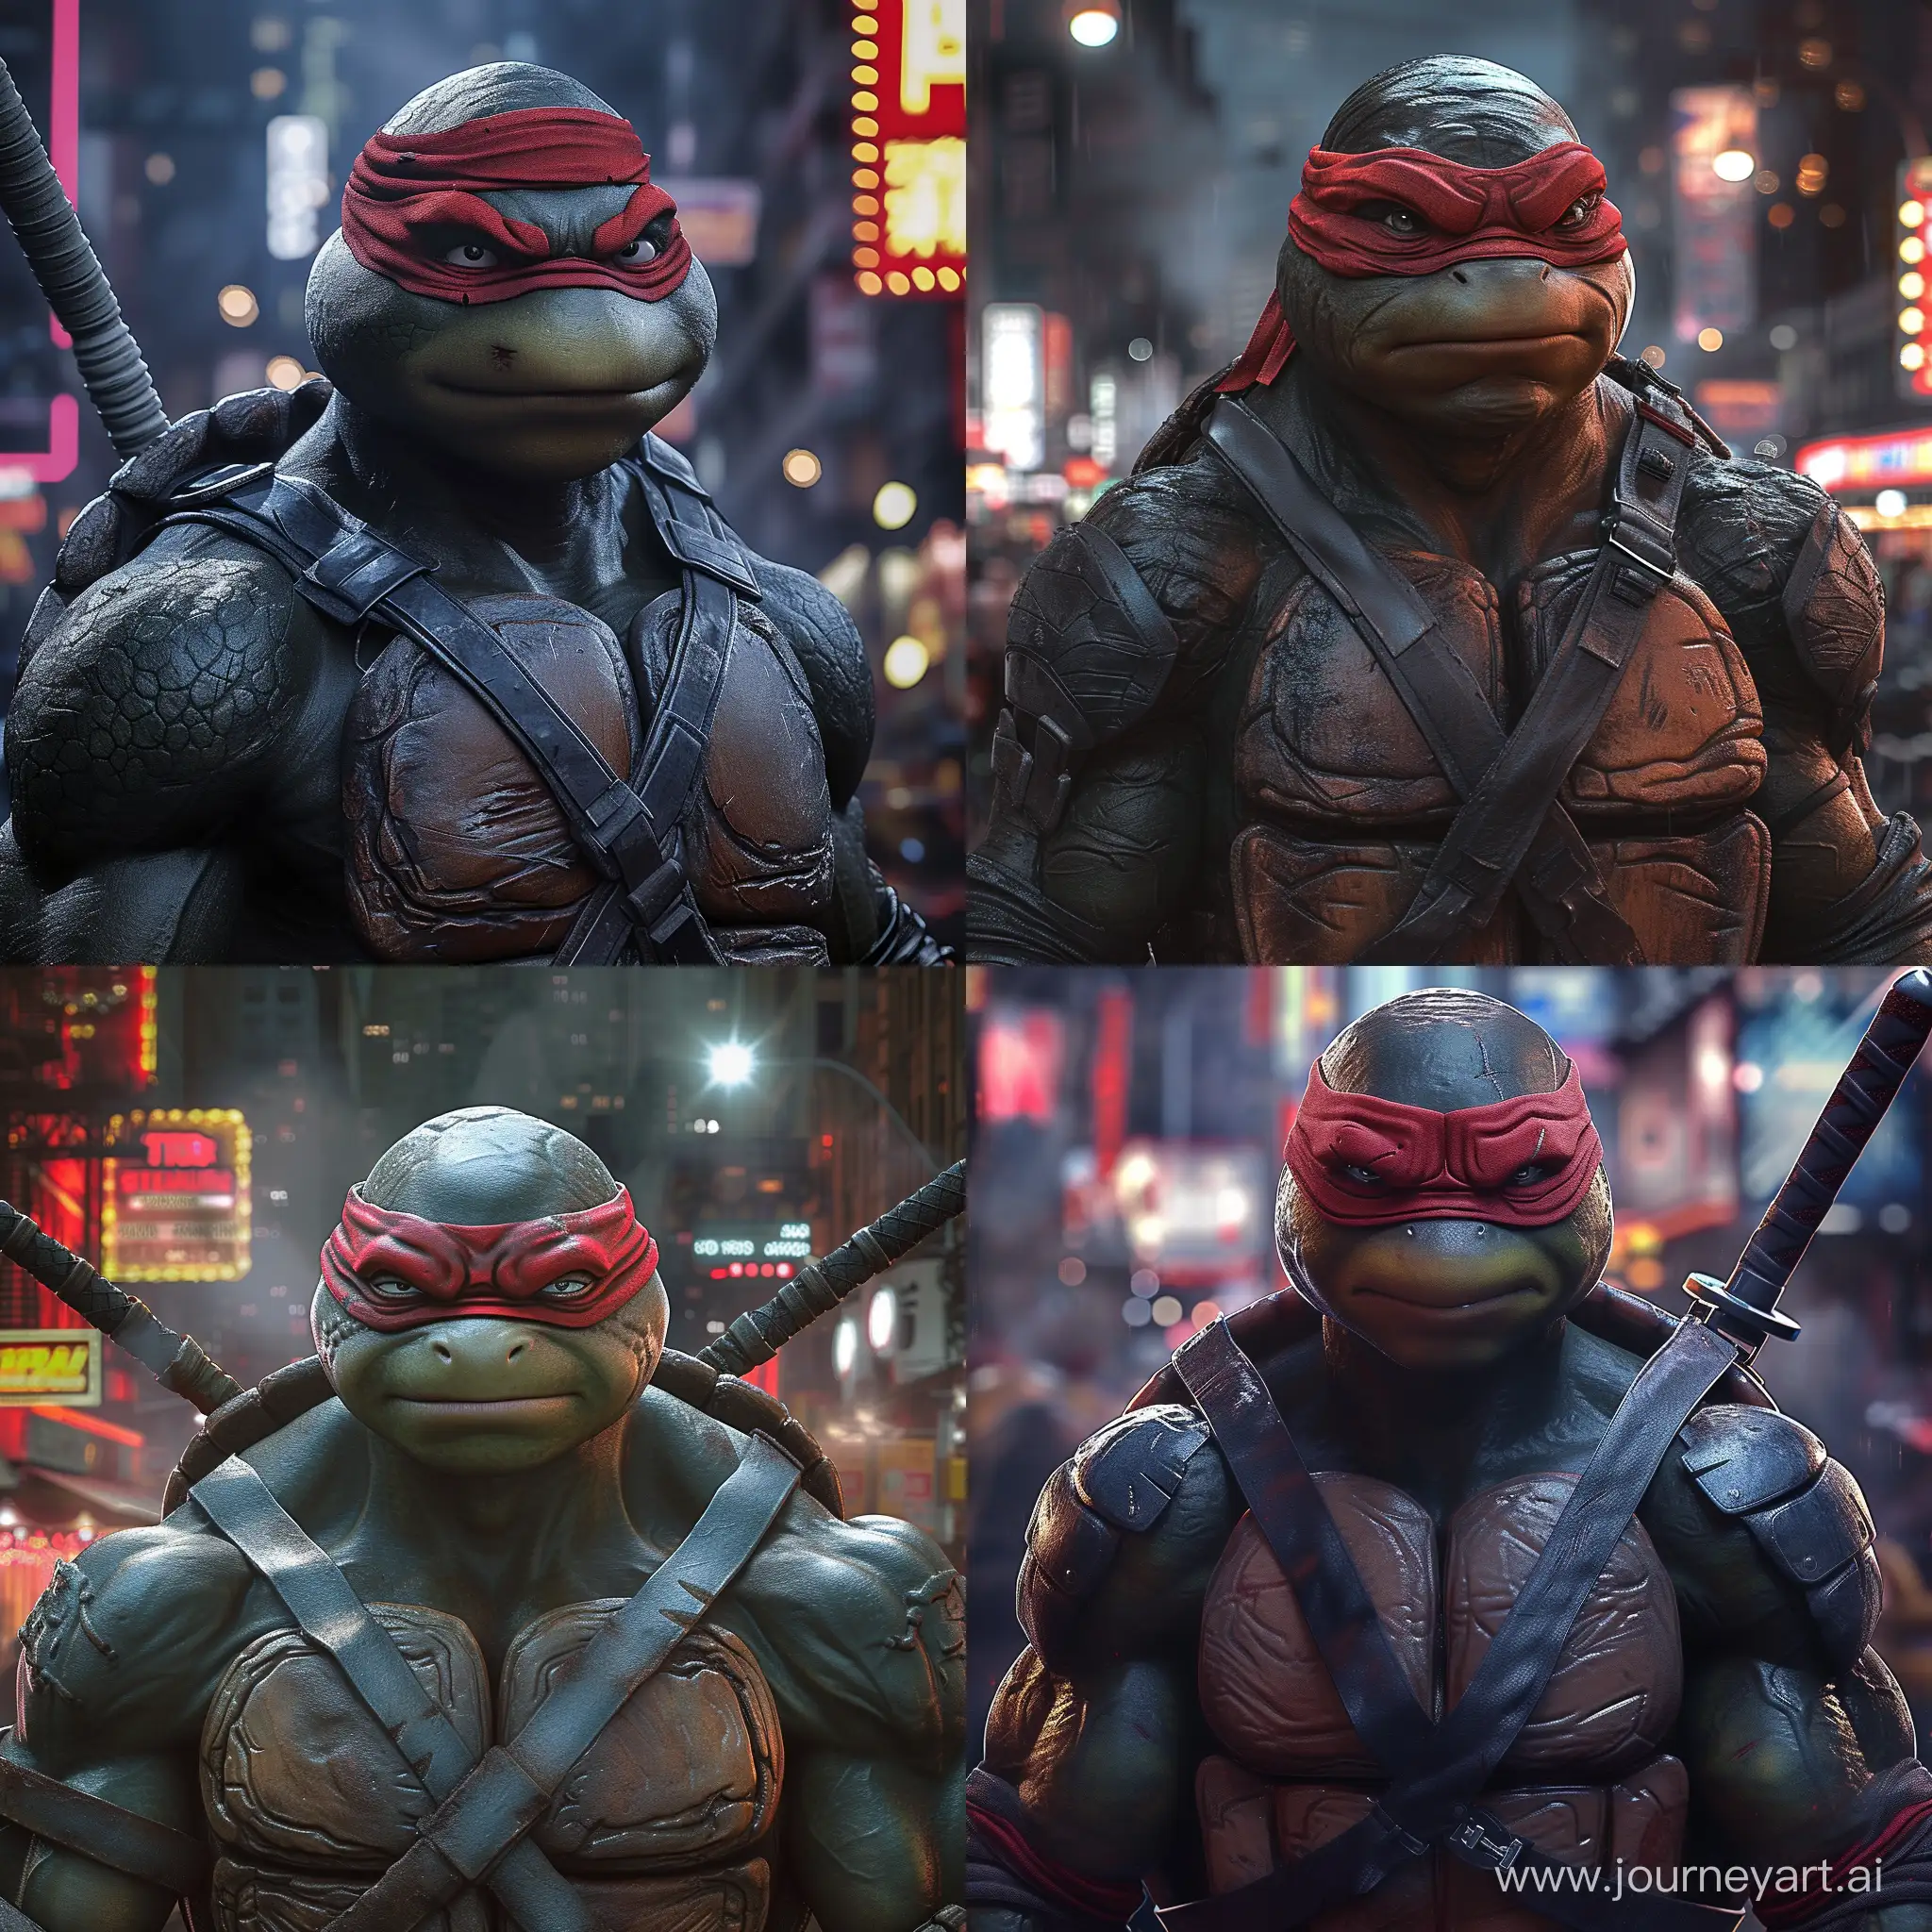 Create a detailed and realistic description of a close-up depiction of Raphael from the Teenage Mutant Ninja Turtles. The description should include his confident posture, wearing a red bandana over his eyes, a serious and somewhat stern facial expression, and muscular arms. He should be depicted in a dark, textured suit of armor-like plating covering his chest and shoulders, with various straps and belts across his torso. The background should be a blurry, bustling urban night scene, possibly suggesting a city like New York, with dim and atmospheric lighting and neon lights glowing in the distance. The description should convey the high-quality, high-resolution, and lifelike appearance of the image, emphasizing the attention to texture and lighting that enhances the character's realism.